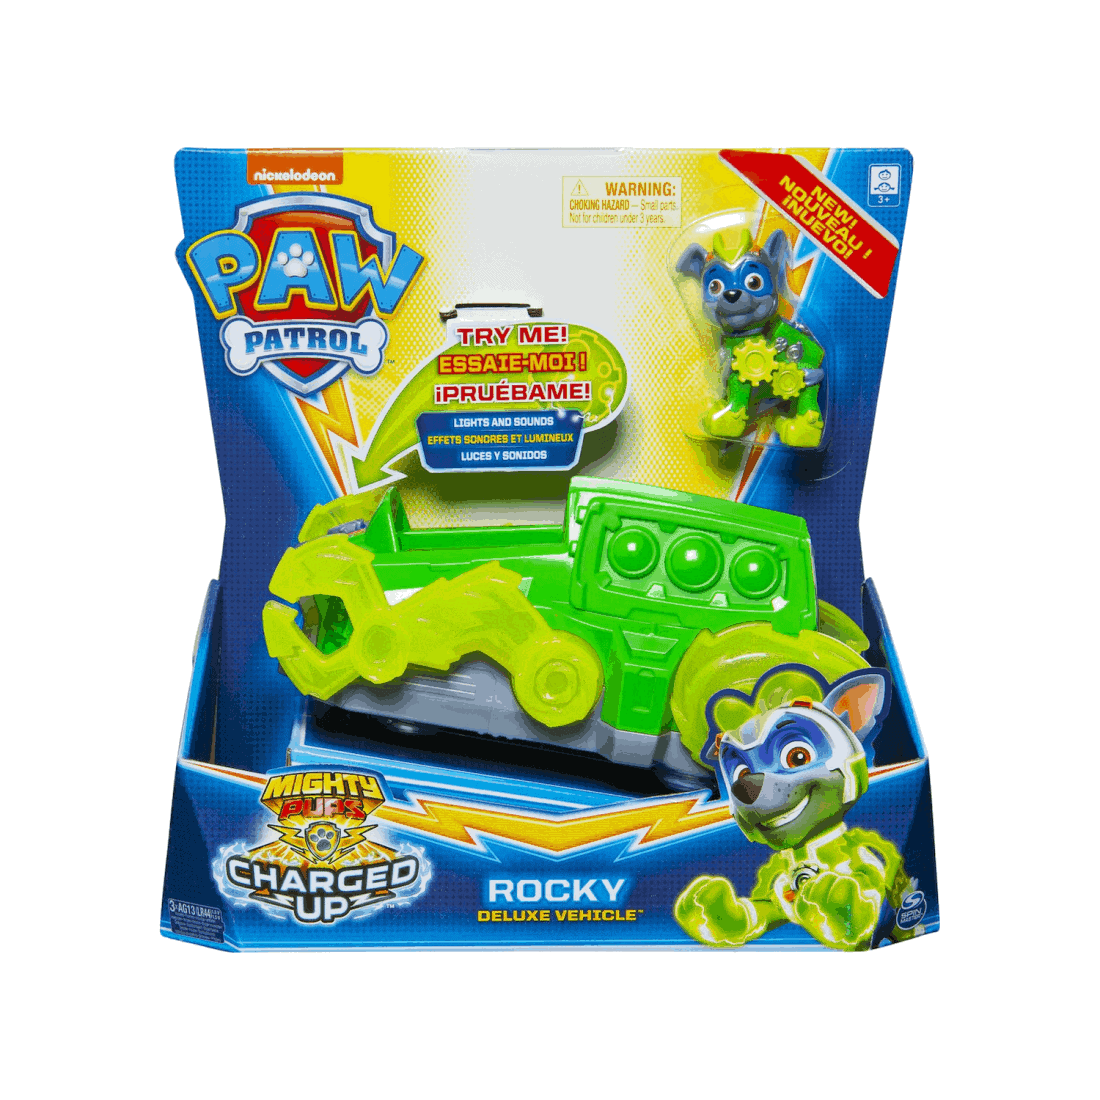 Spin Master Paw Patrol - Mighty Pups Charged up - Deluxe Vehicle - Rocky